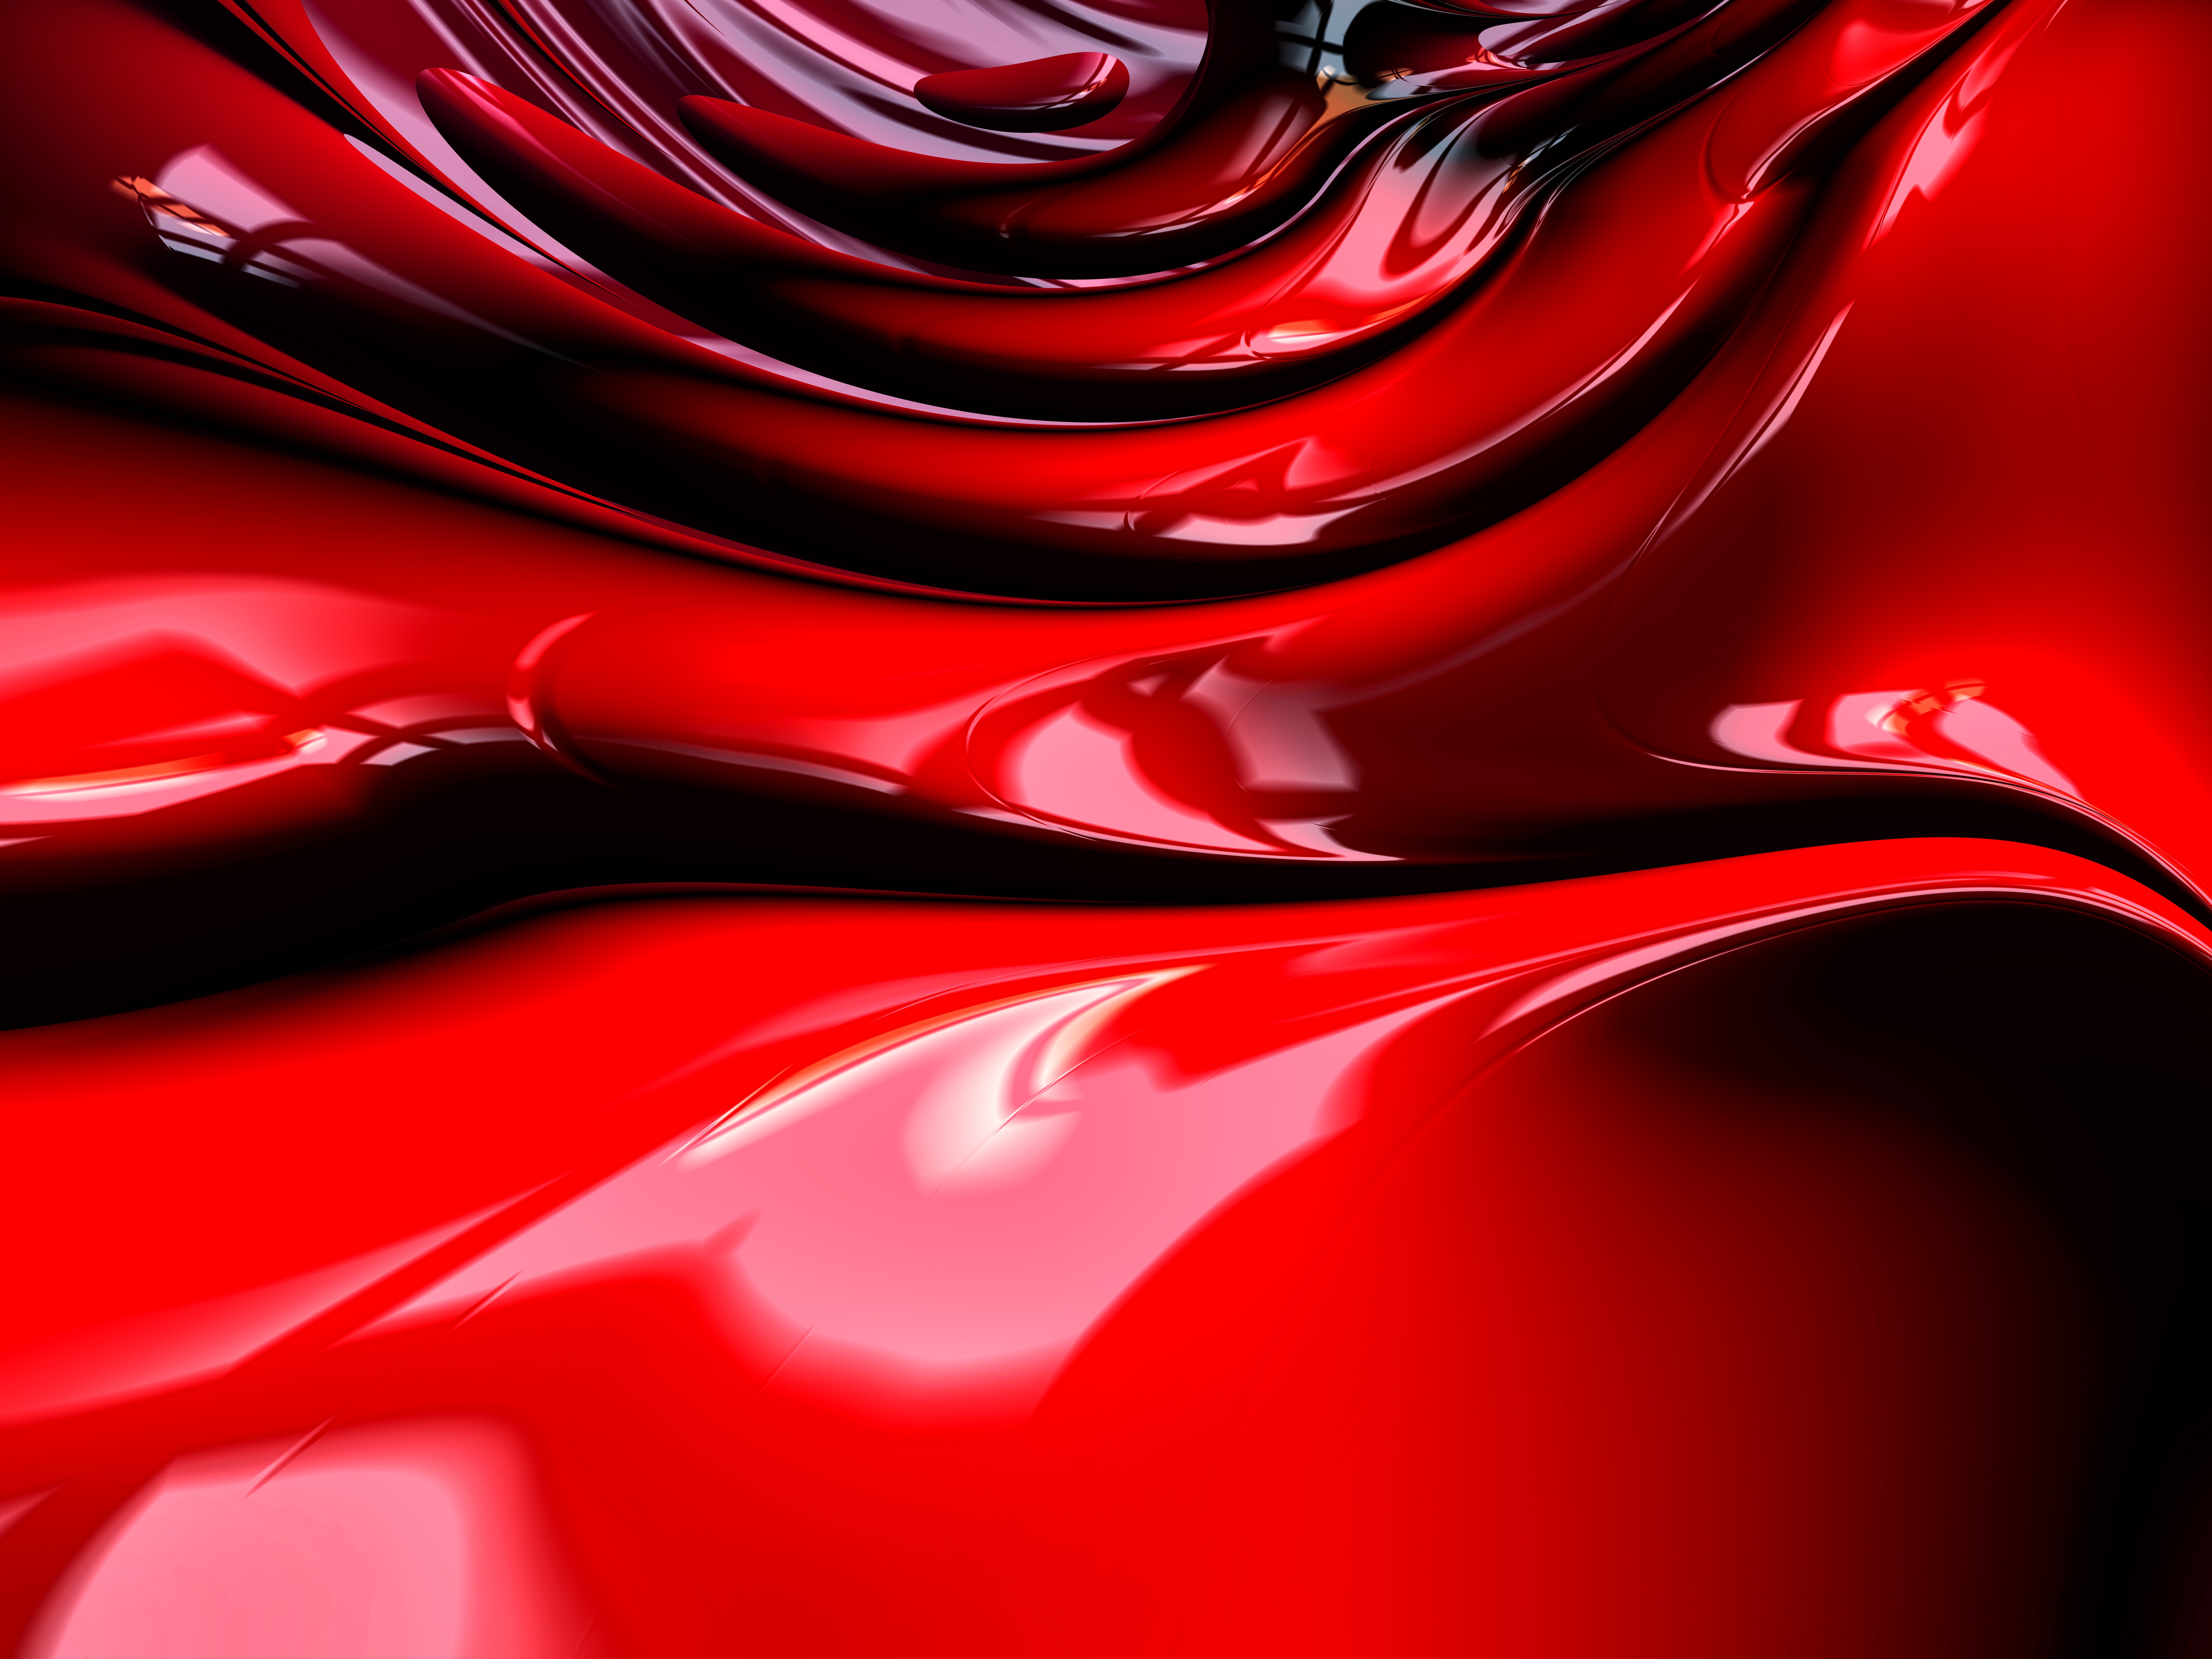 53011 free download Red wallpapers for phone, 3d, structure, surface, form Red images and screensavers for mobile